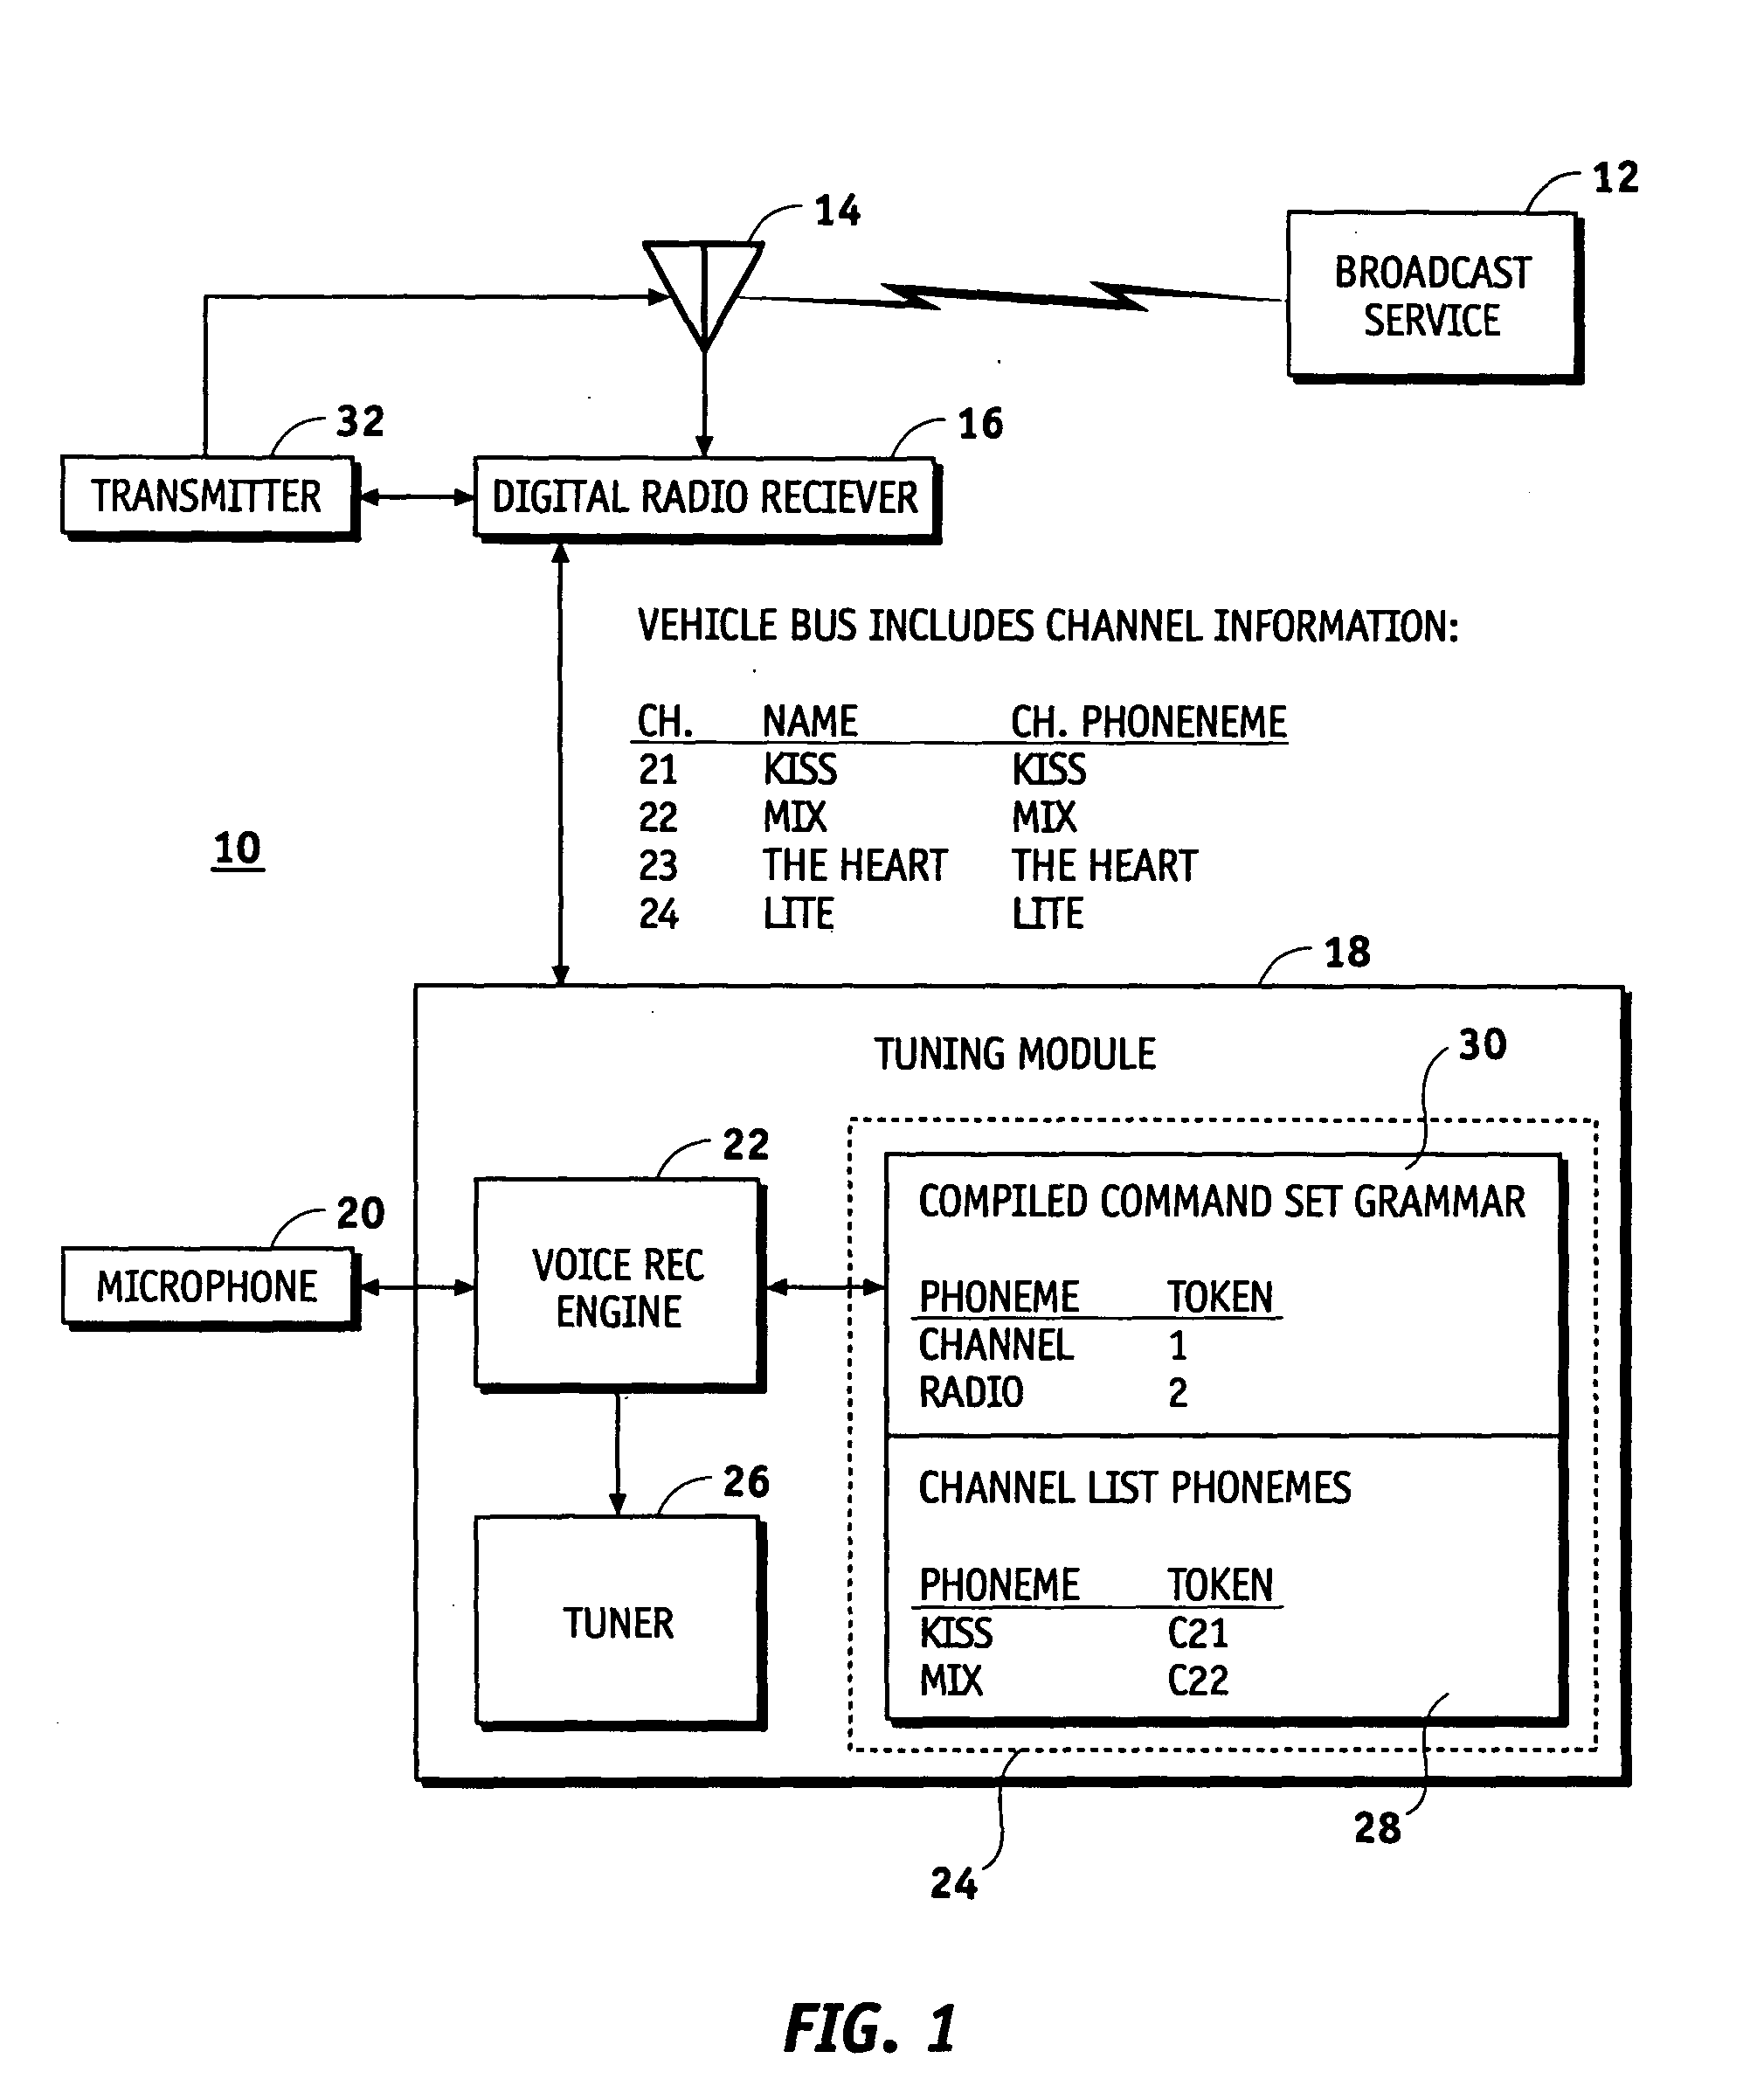 Voice recognition in a vehicle radio system